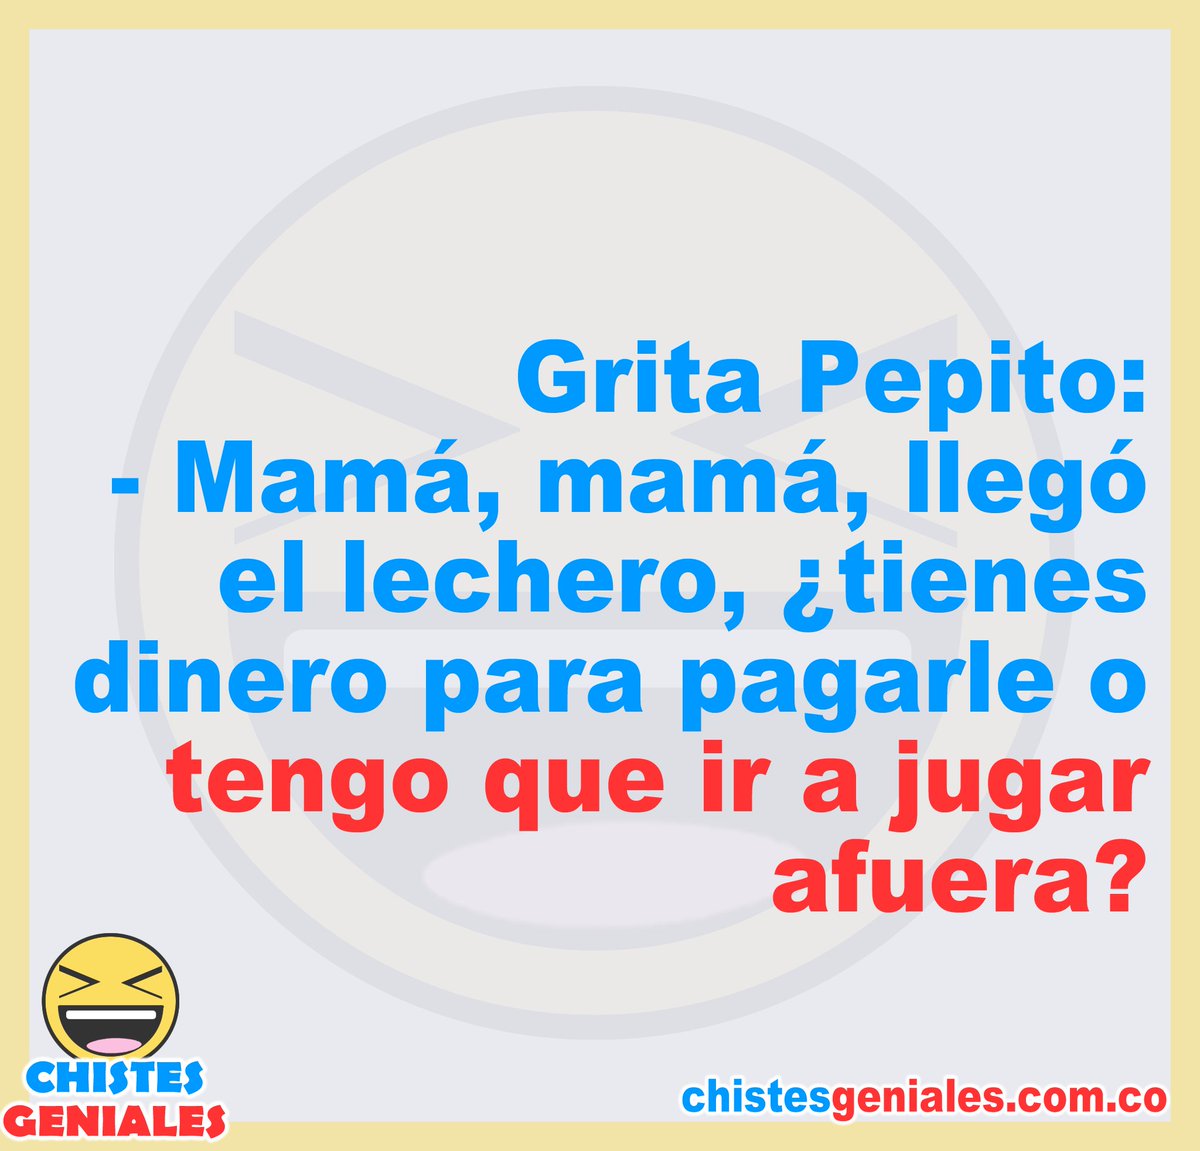 Chistes Geniales on Twitter: 